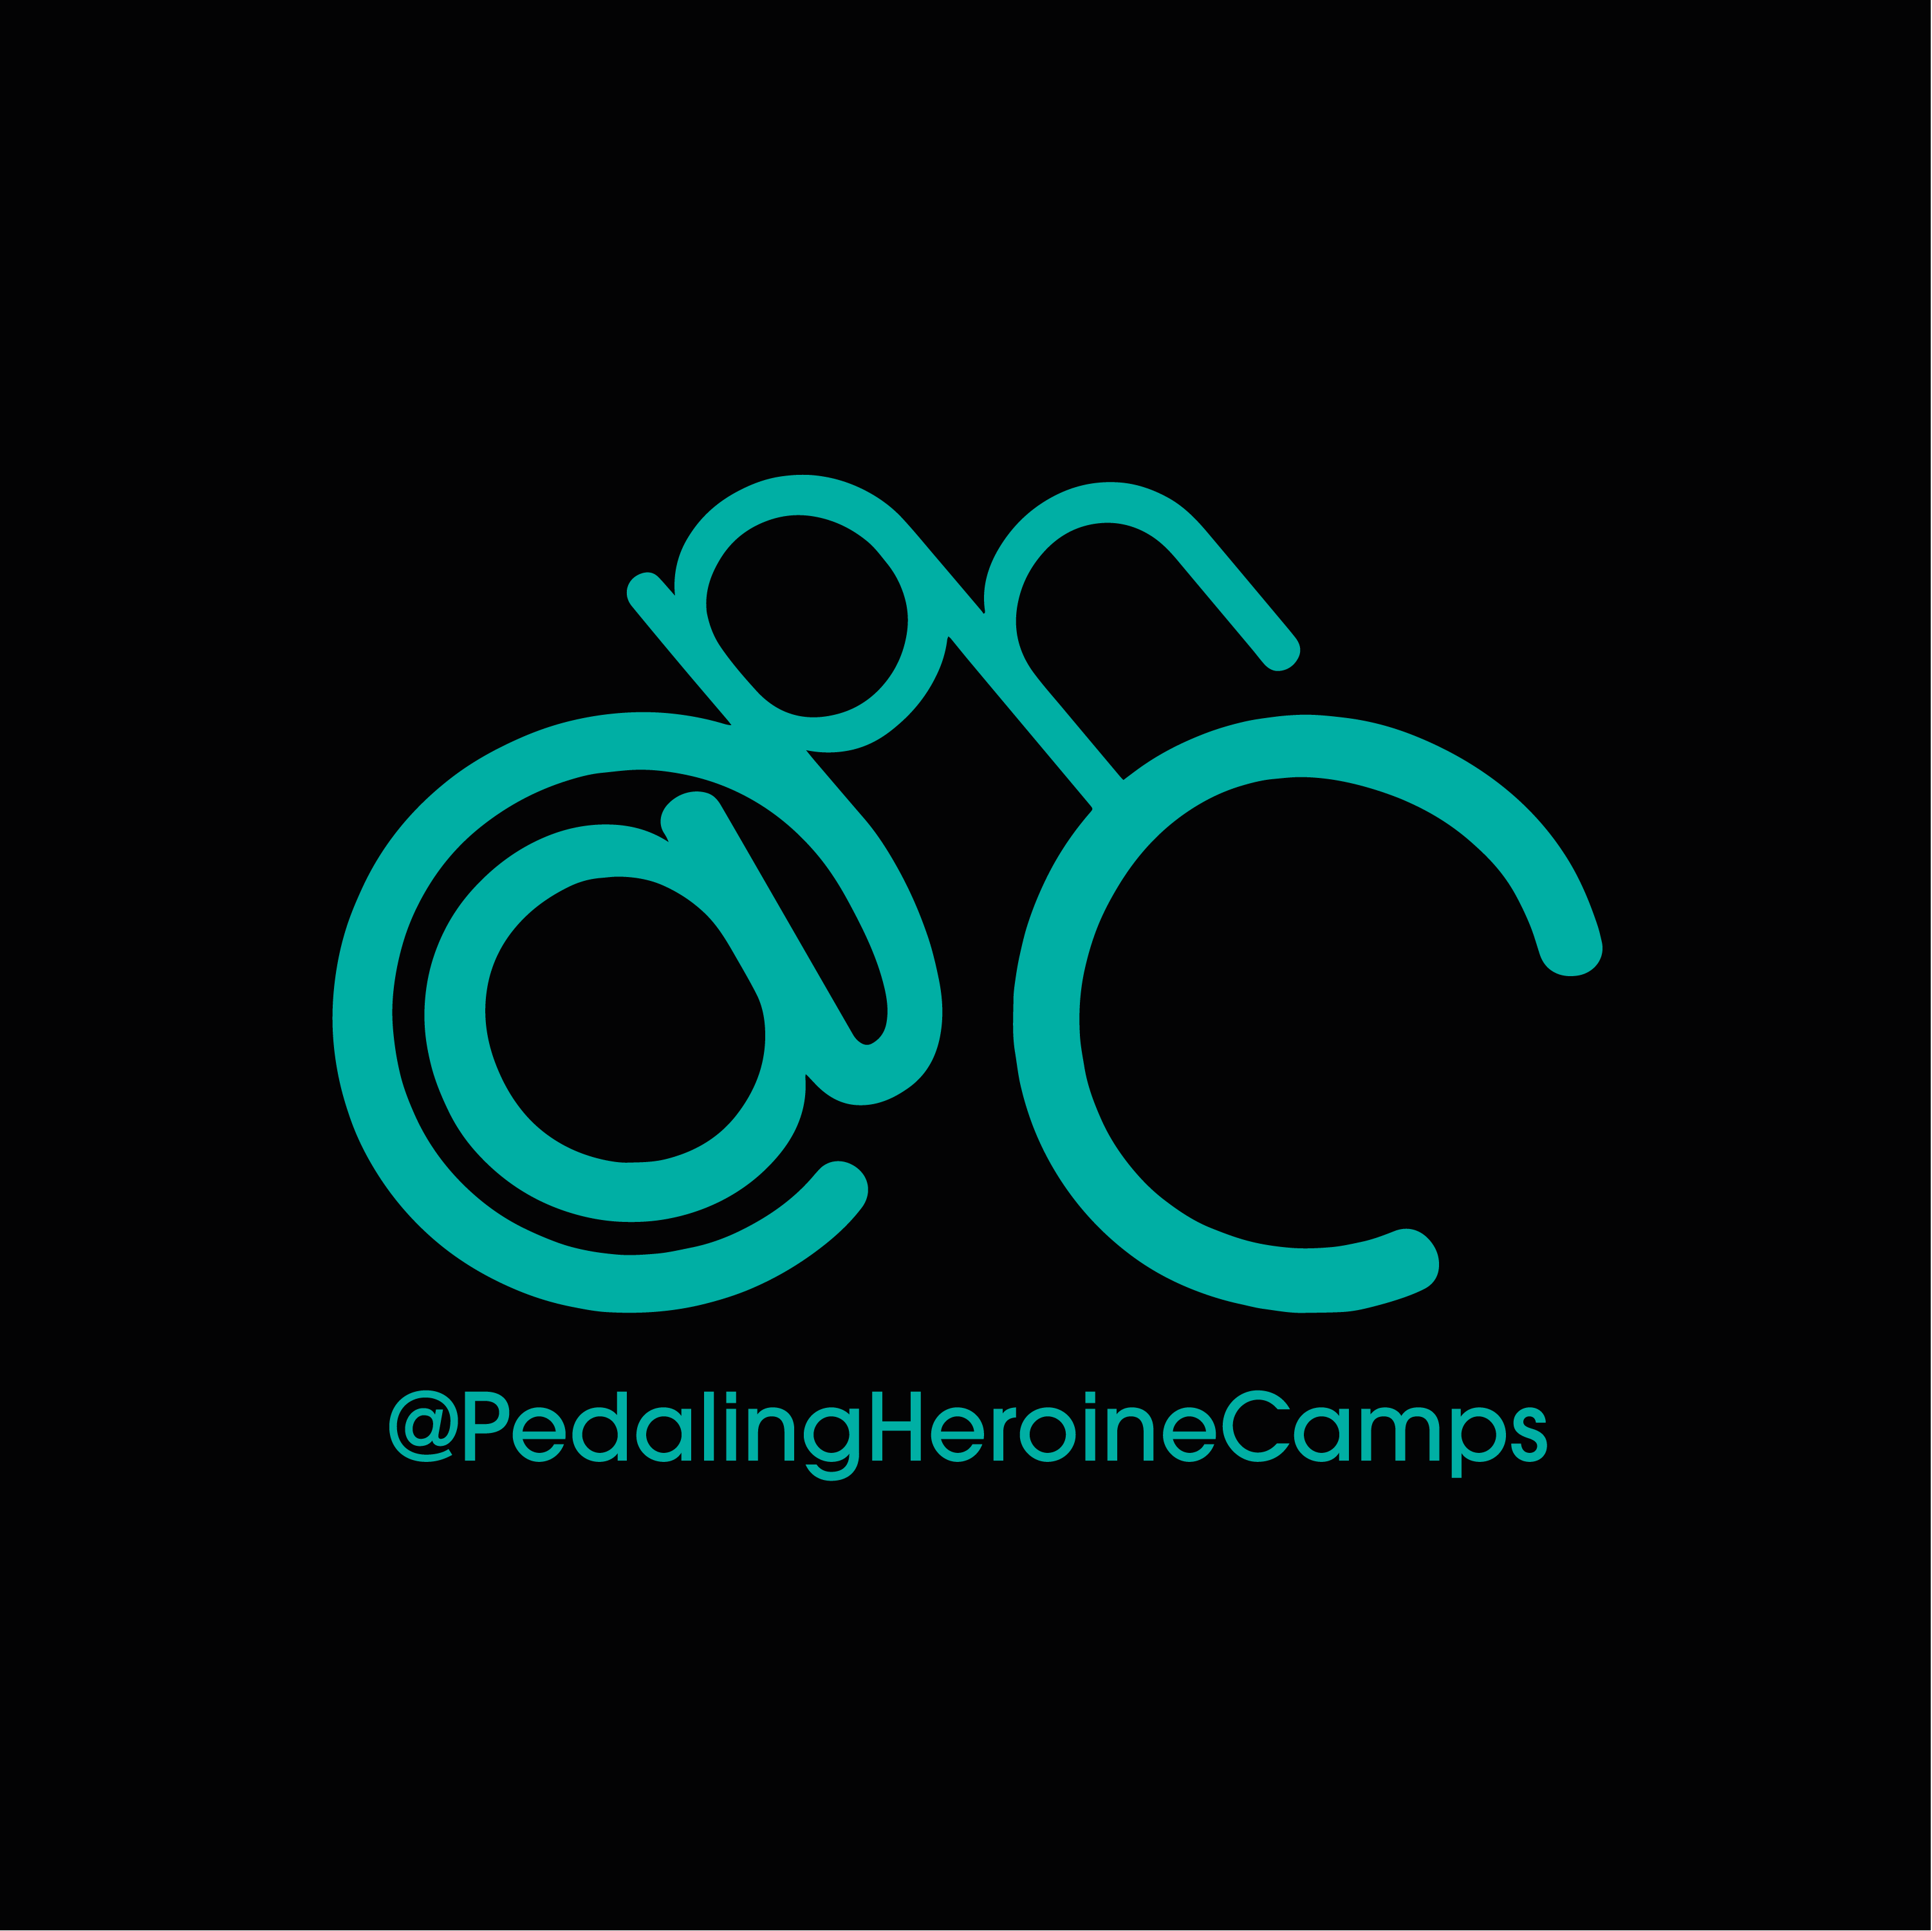 Club Image for PEDALING HEROINE CAMPS